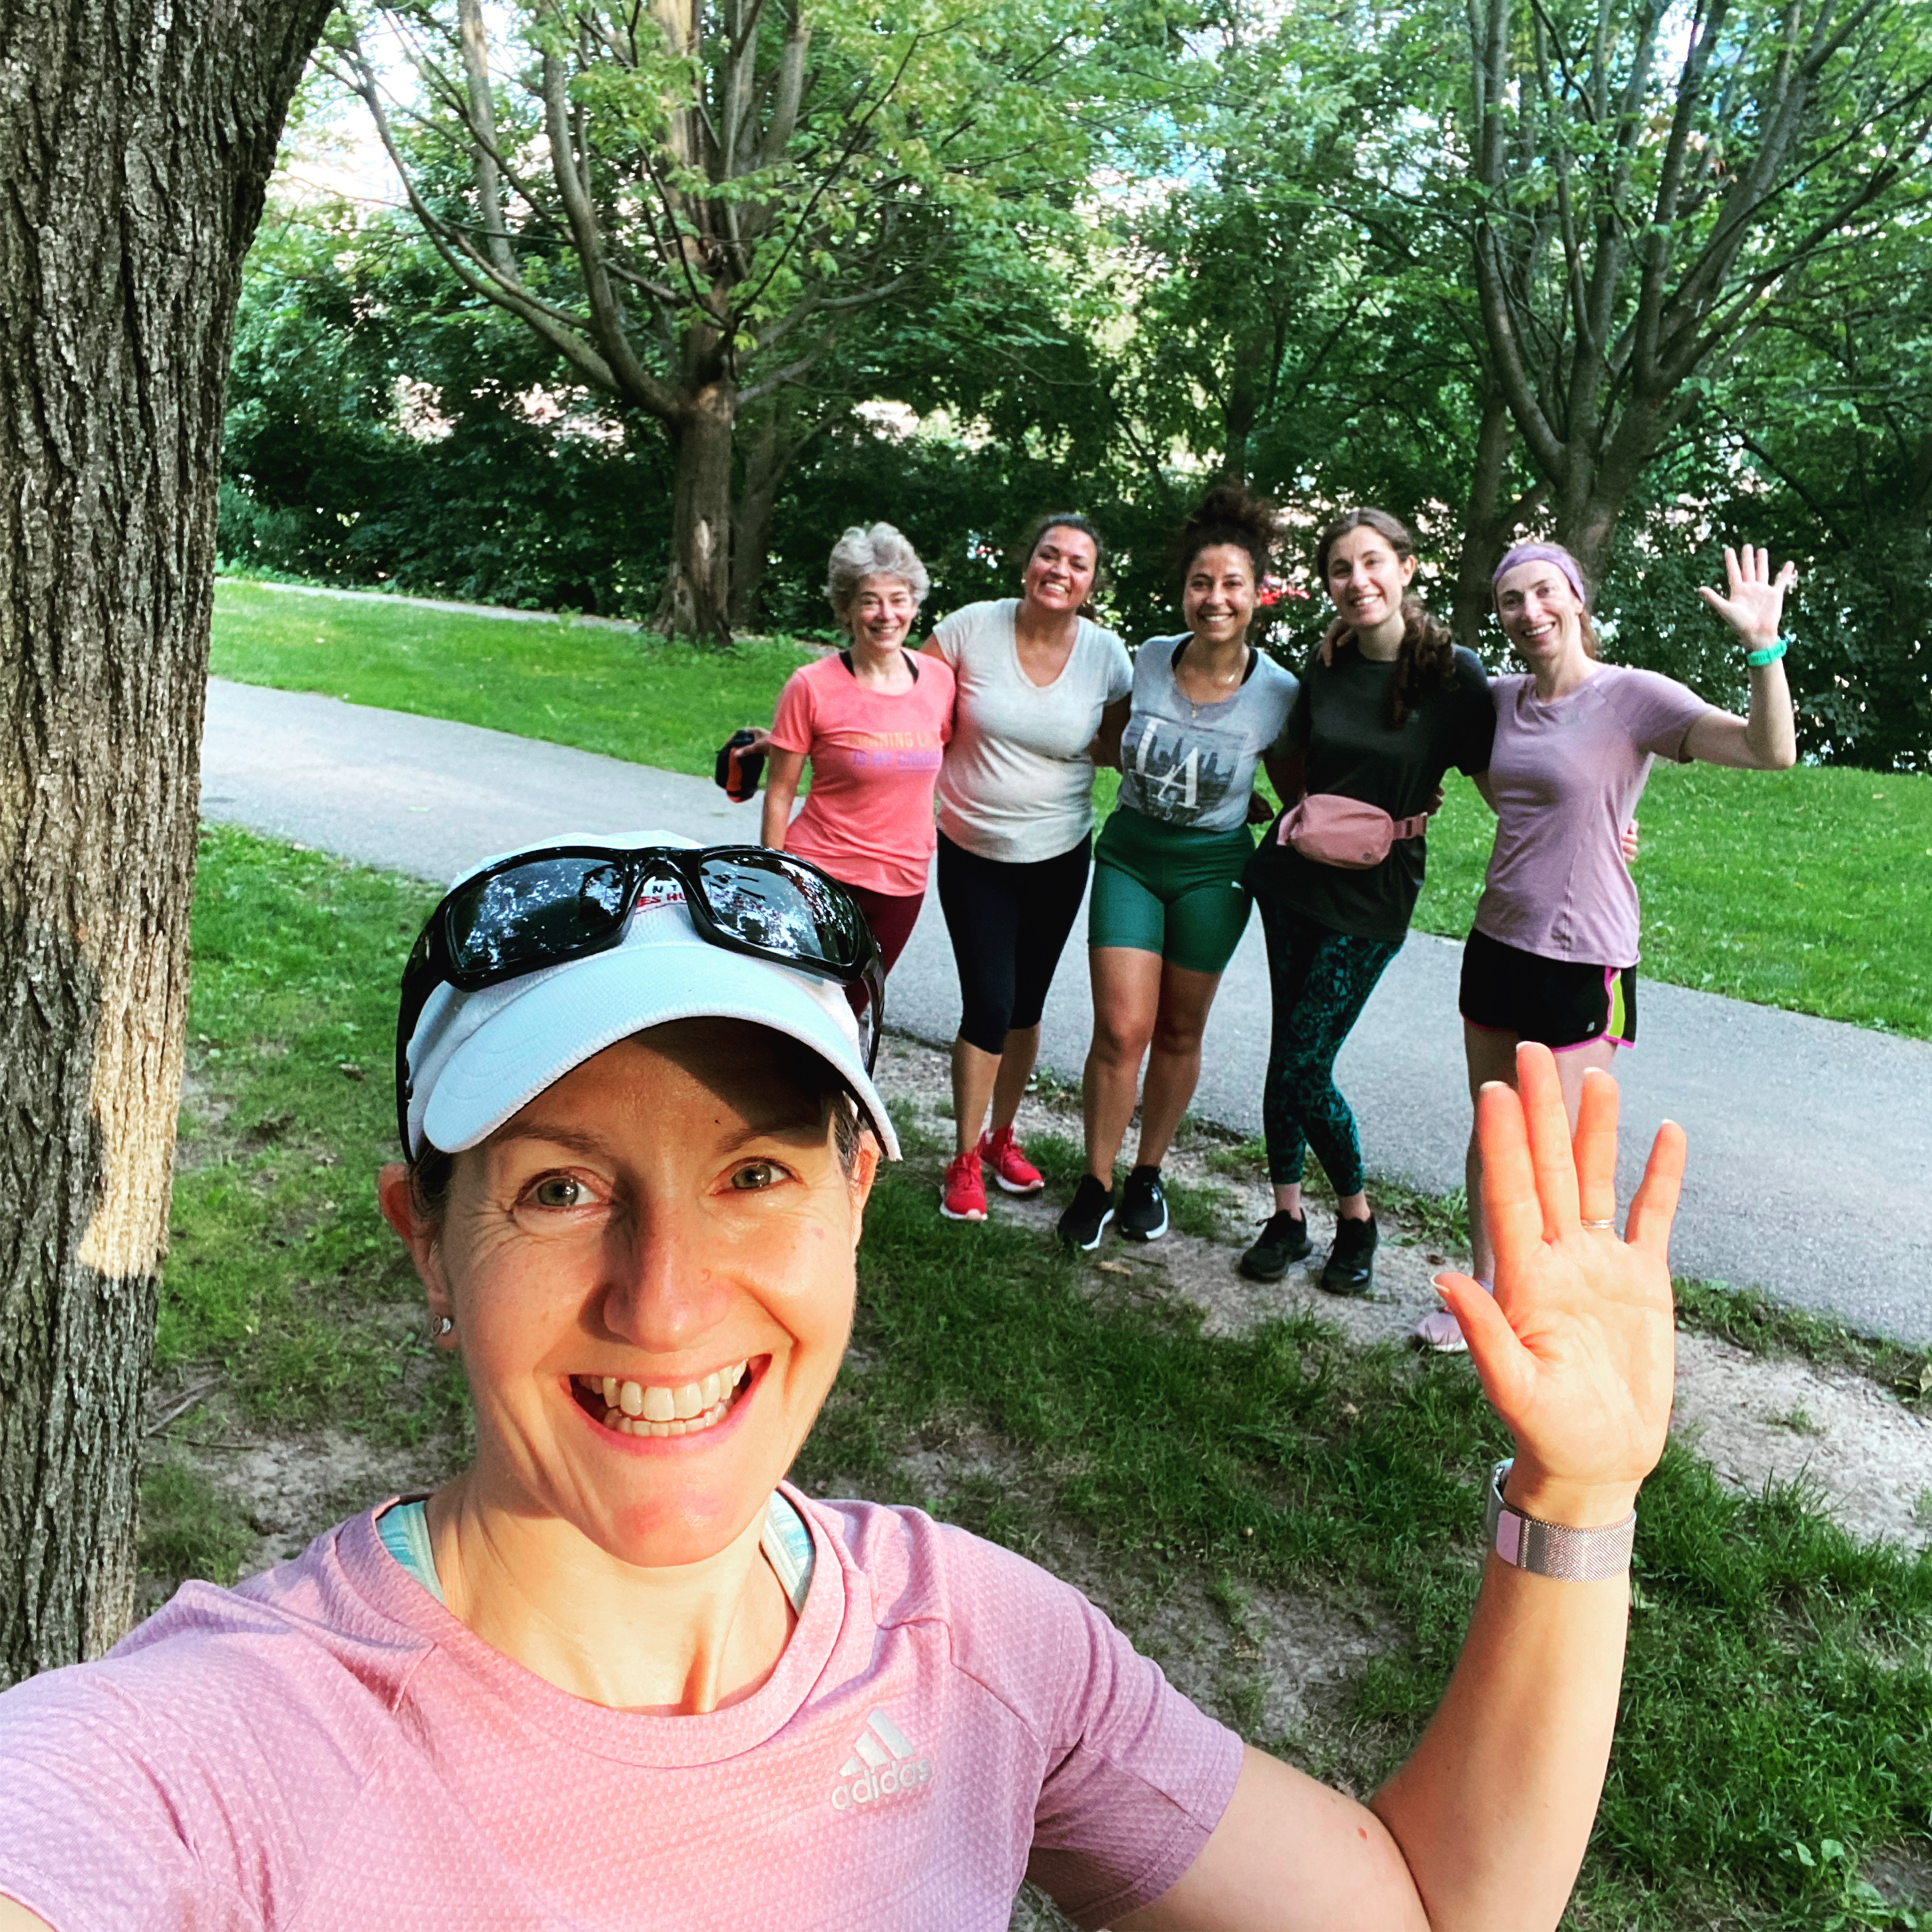 Selfie of a group happy female 261 Fearless runners , enjoying a sunny day in a lush park, reflecting the spirit of camaraderie and joy in fitness